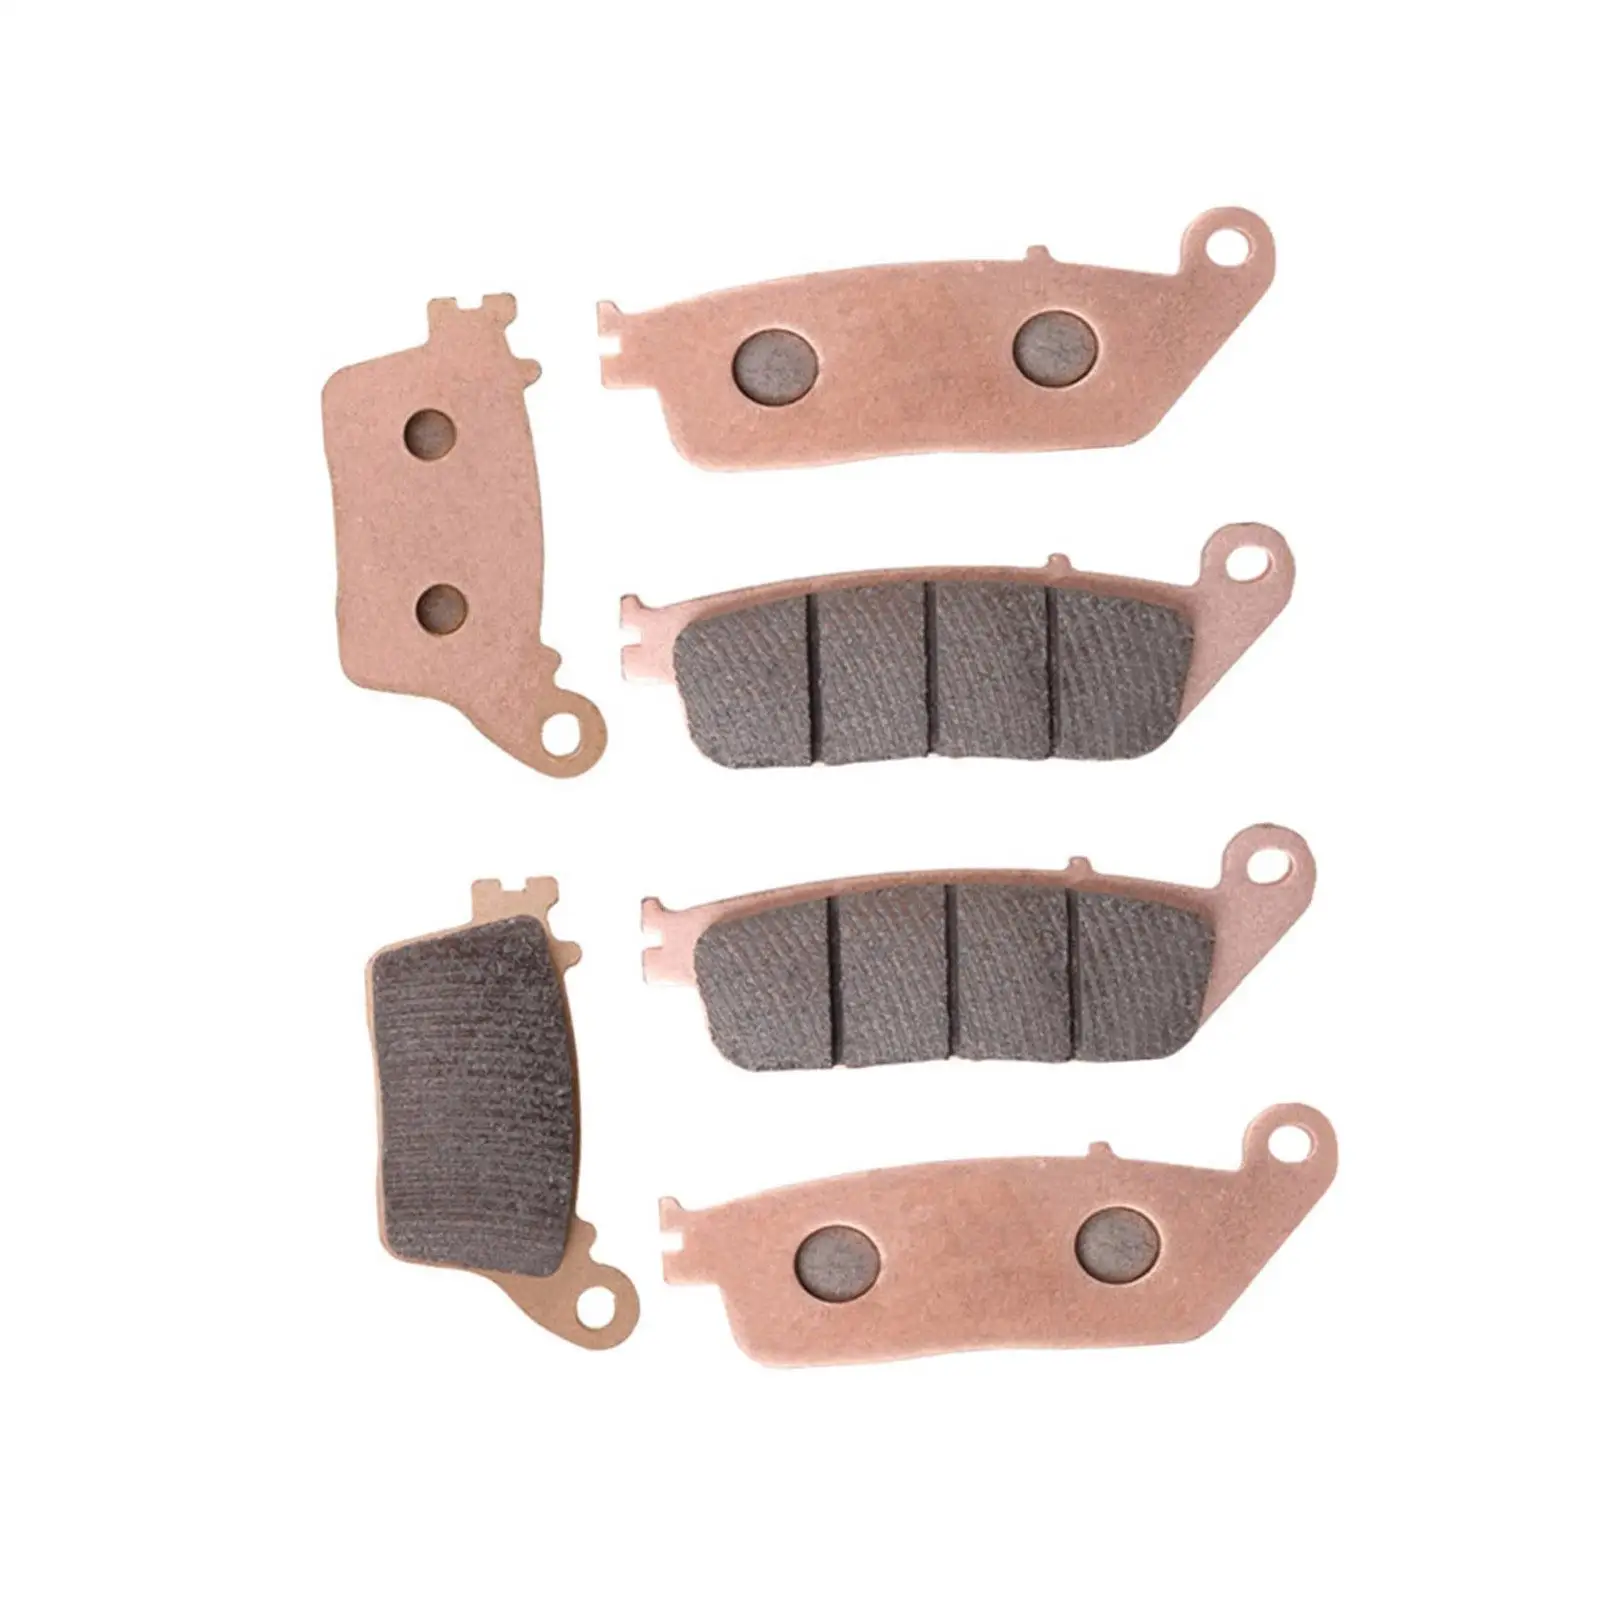 6 Pieces Front and Rear Brake Pads Motorcycle Replacement Part for Honda CB600 F7 F8 F9 Fa FB FC Hornet CBR600 FB FC Sturdy